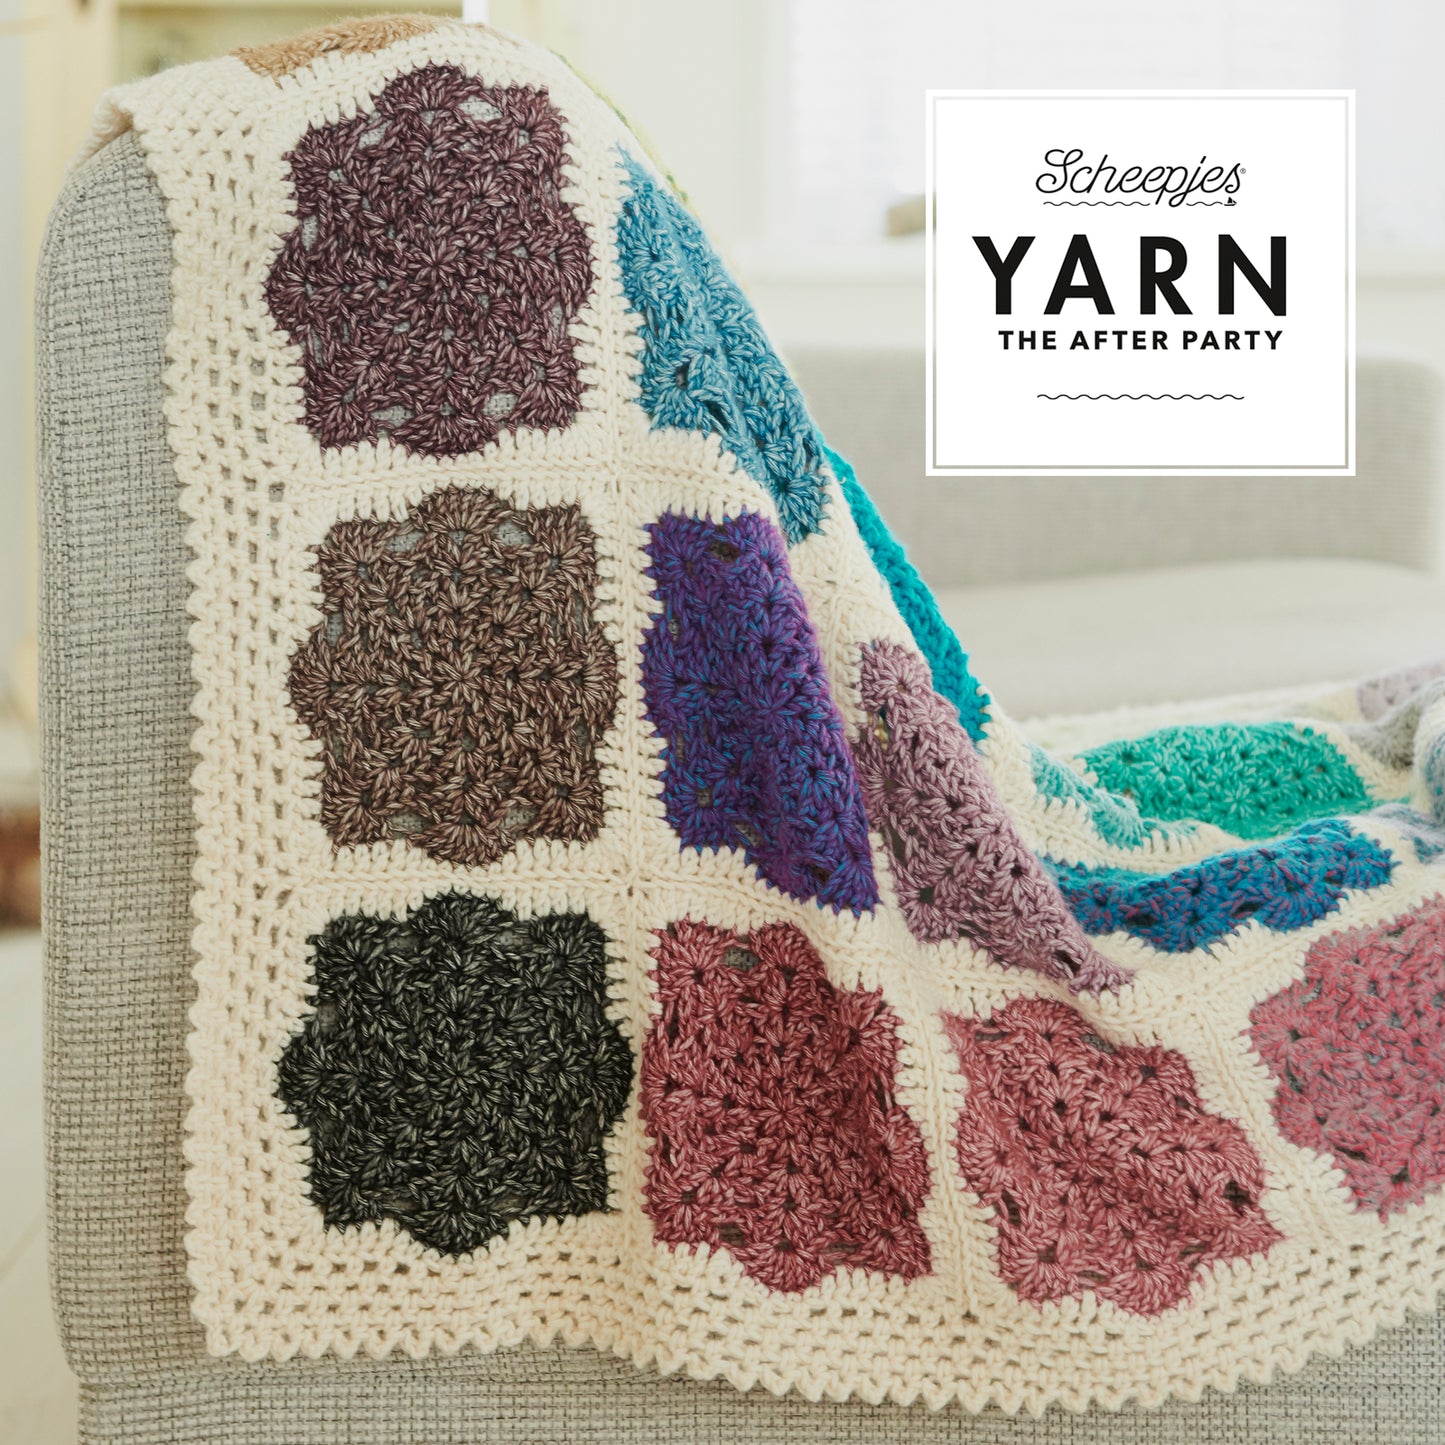 Scheepjes Yarn The After Party no. 81 - Memory Throw (booklet) - (Crochet)